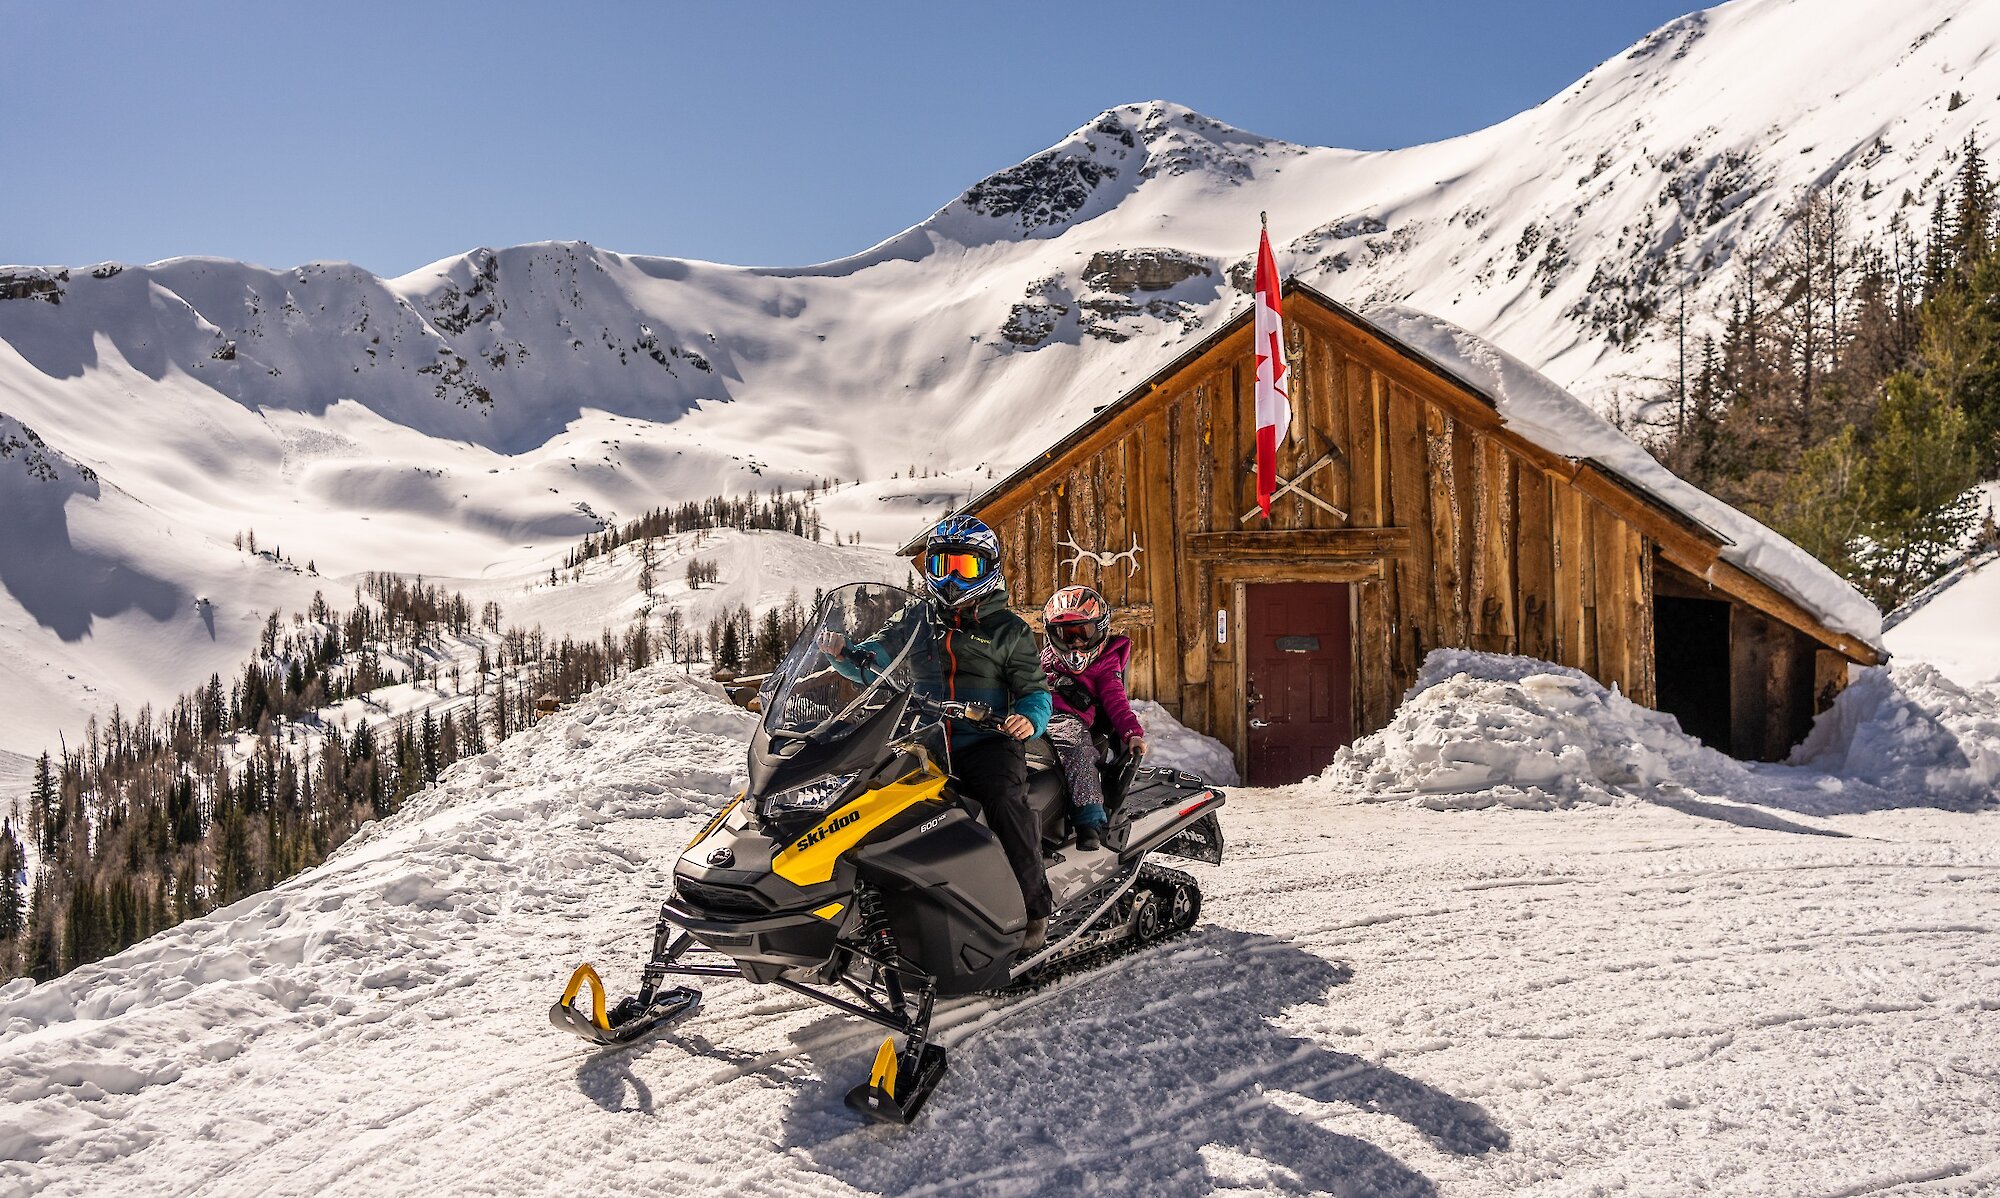 Guests at the cabin on the Paradise Basin snowmobile tour